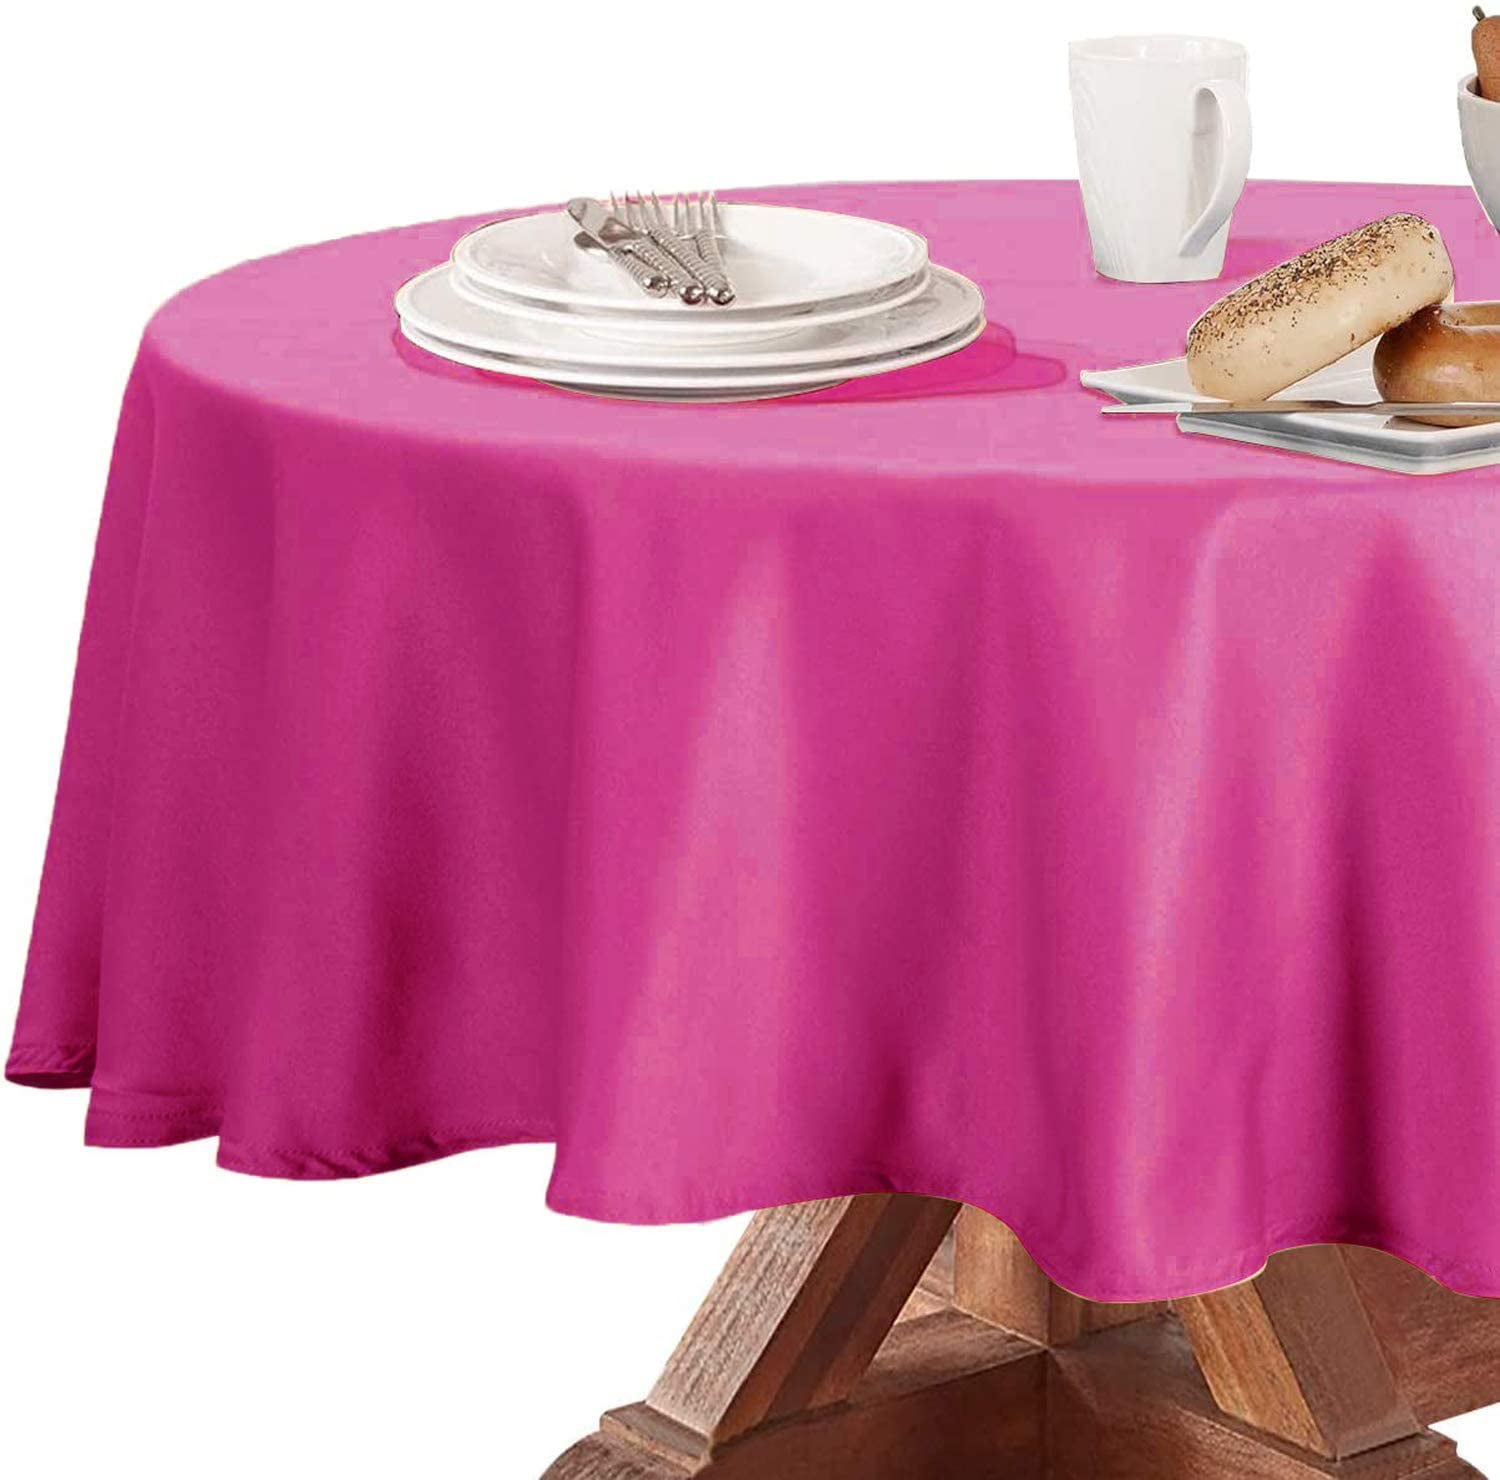 Multicolor Texture Geometry Proof Spill-Proof and Water Resistance Tablecloth,Decorative Fabric Table Cover for Outdoor and Indoor 60 X 90 Inch 